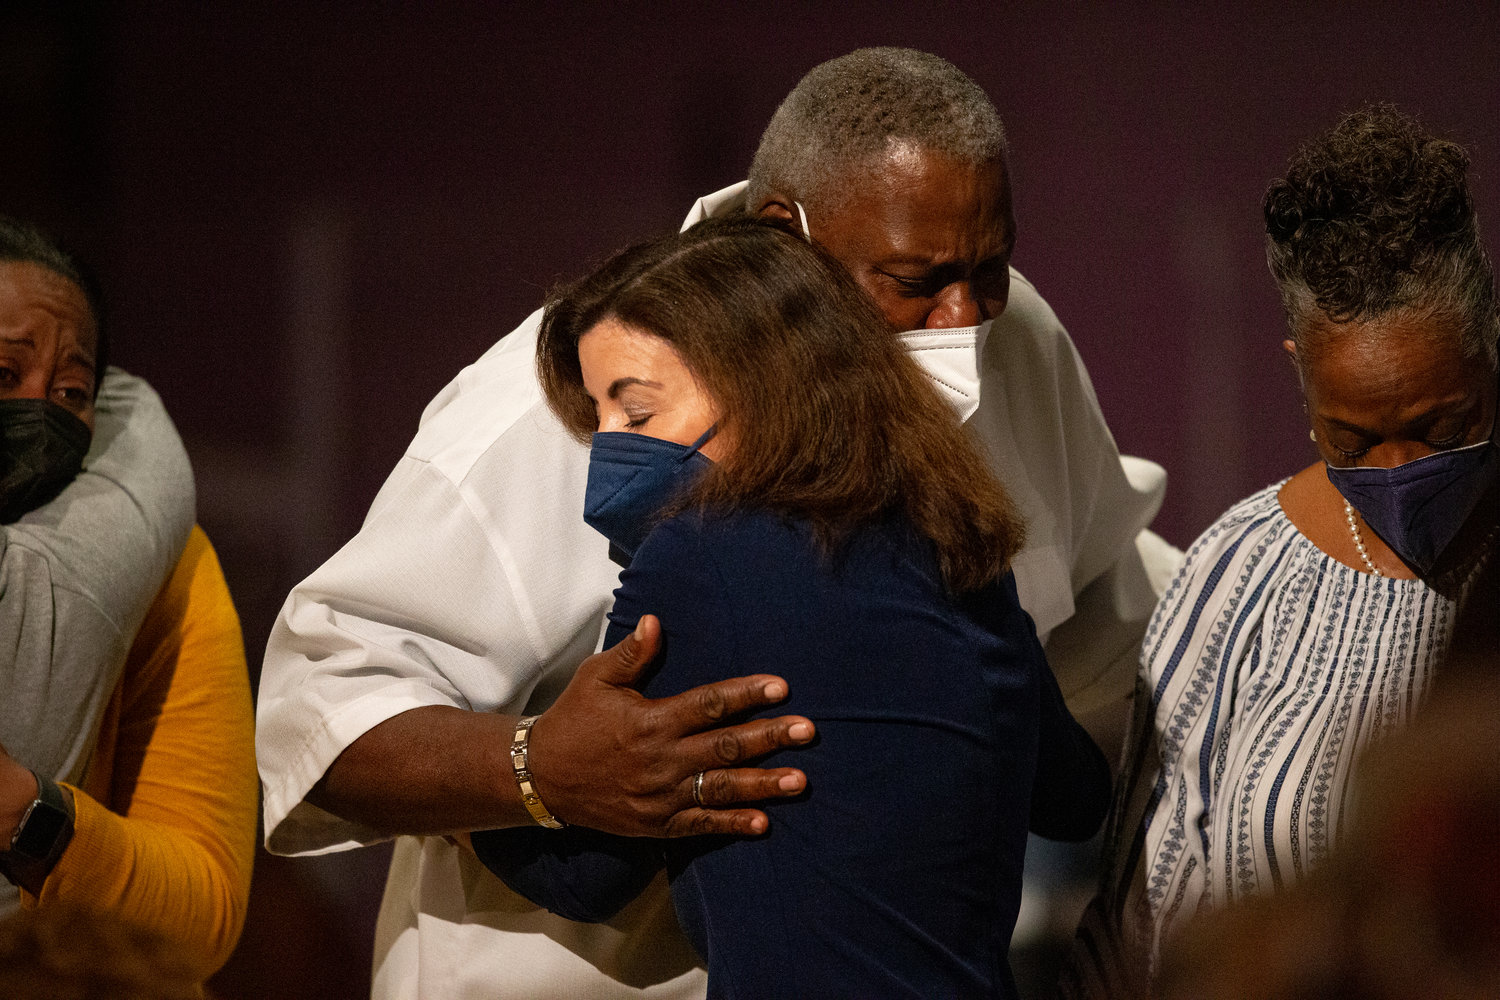 New York Gov. Kathy Hochul hugs Charles Everhart Sr. as service ends at True Bethel Baptist Church on Sunday, May 15, 2022, in Buffalo, N.Y.. Everhart's grandson, Zaire Goodman, was shot in the neck and survived during a shooting at a Buffalo supermarket on May 14. Goodman was released from the hospital last night. "I'm just grateful that God saved his life," said Everhart. (AP Photo/Joshua Bessex)